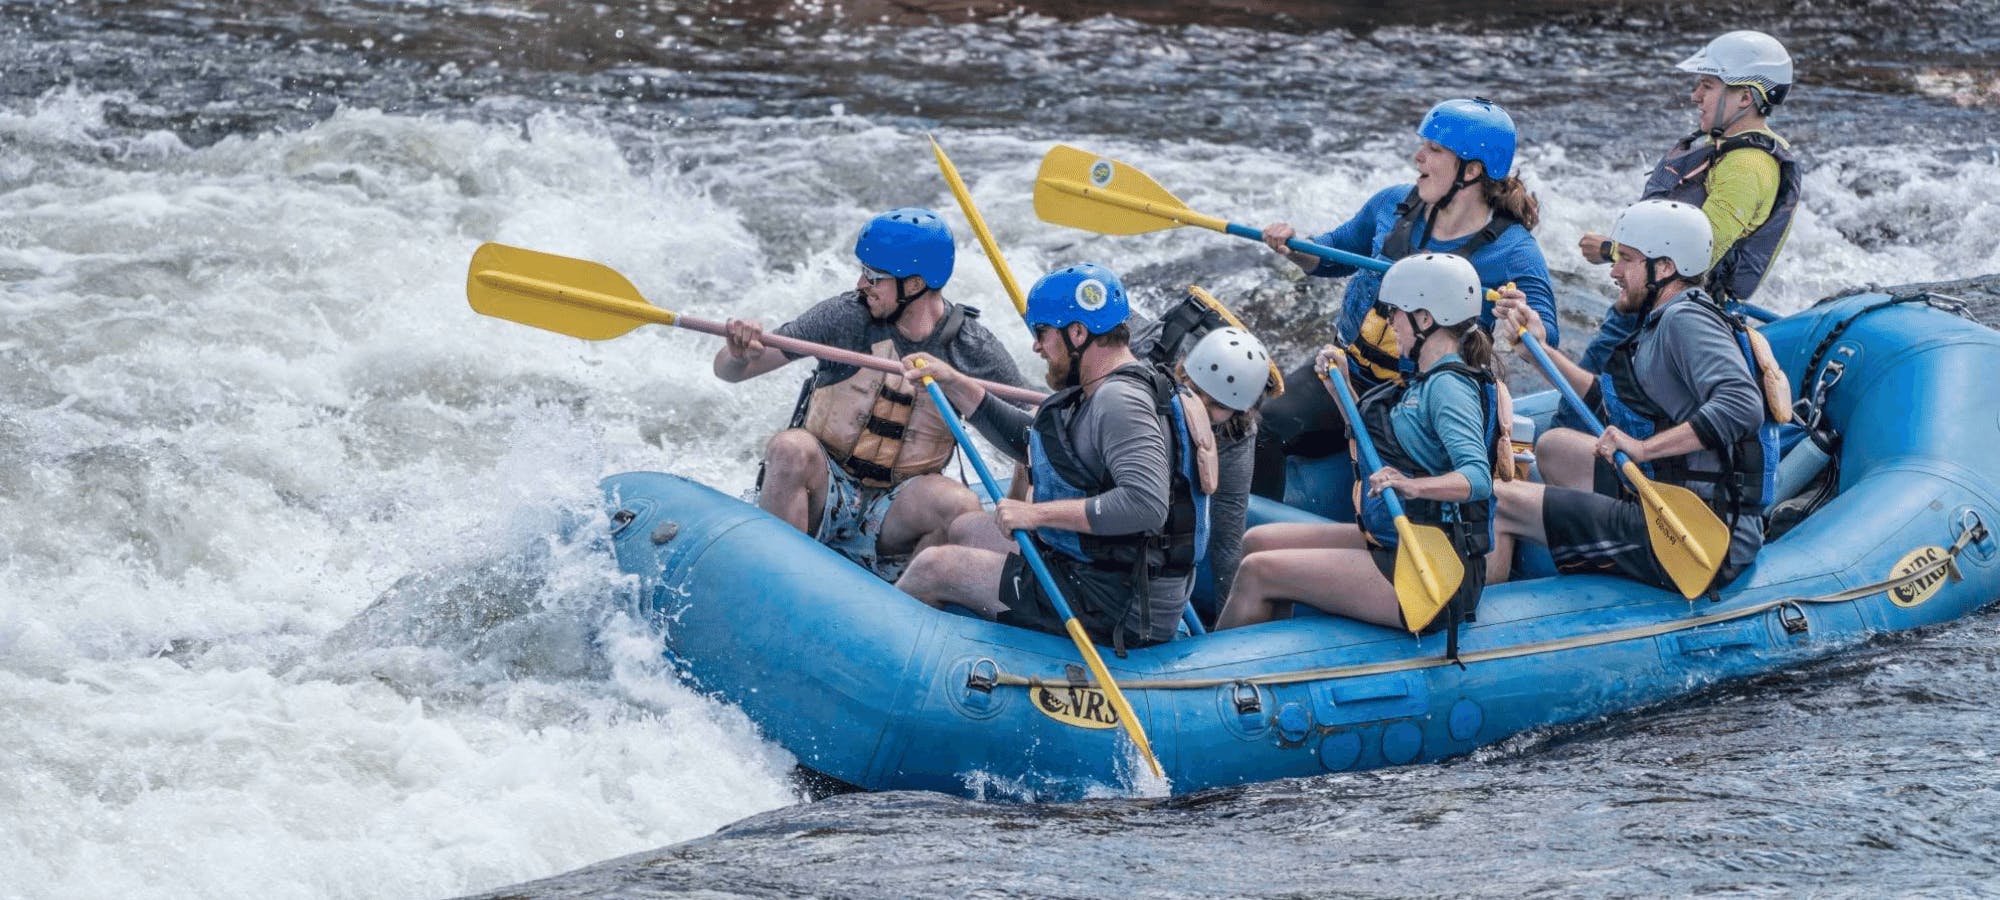 Tubing and Rafting on the James River in Downtown Richmond